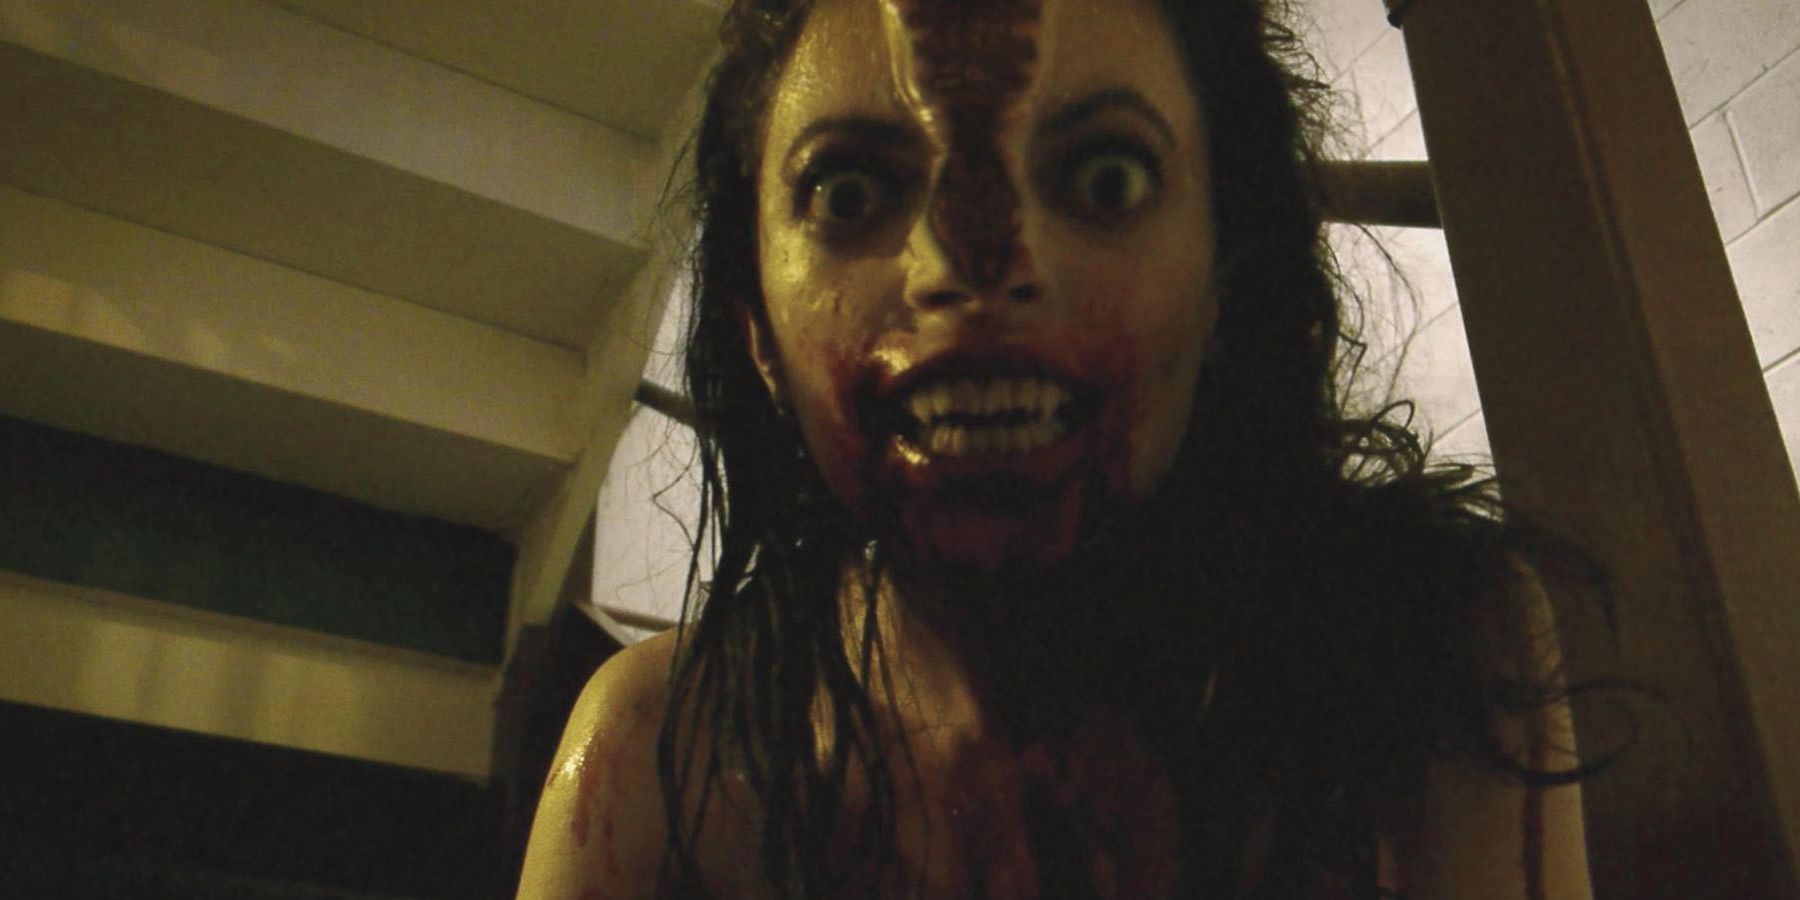 How To Watch Every V/H/S Movie In Order (Chronologically & By Release Date)